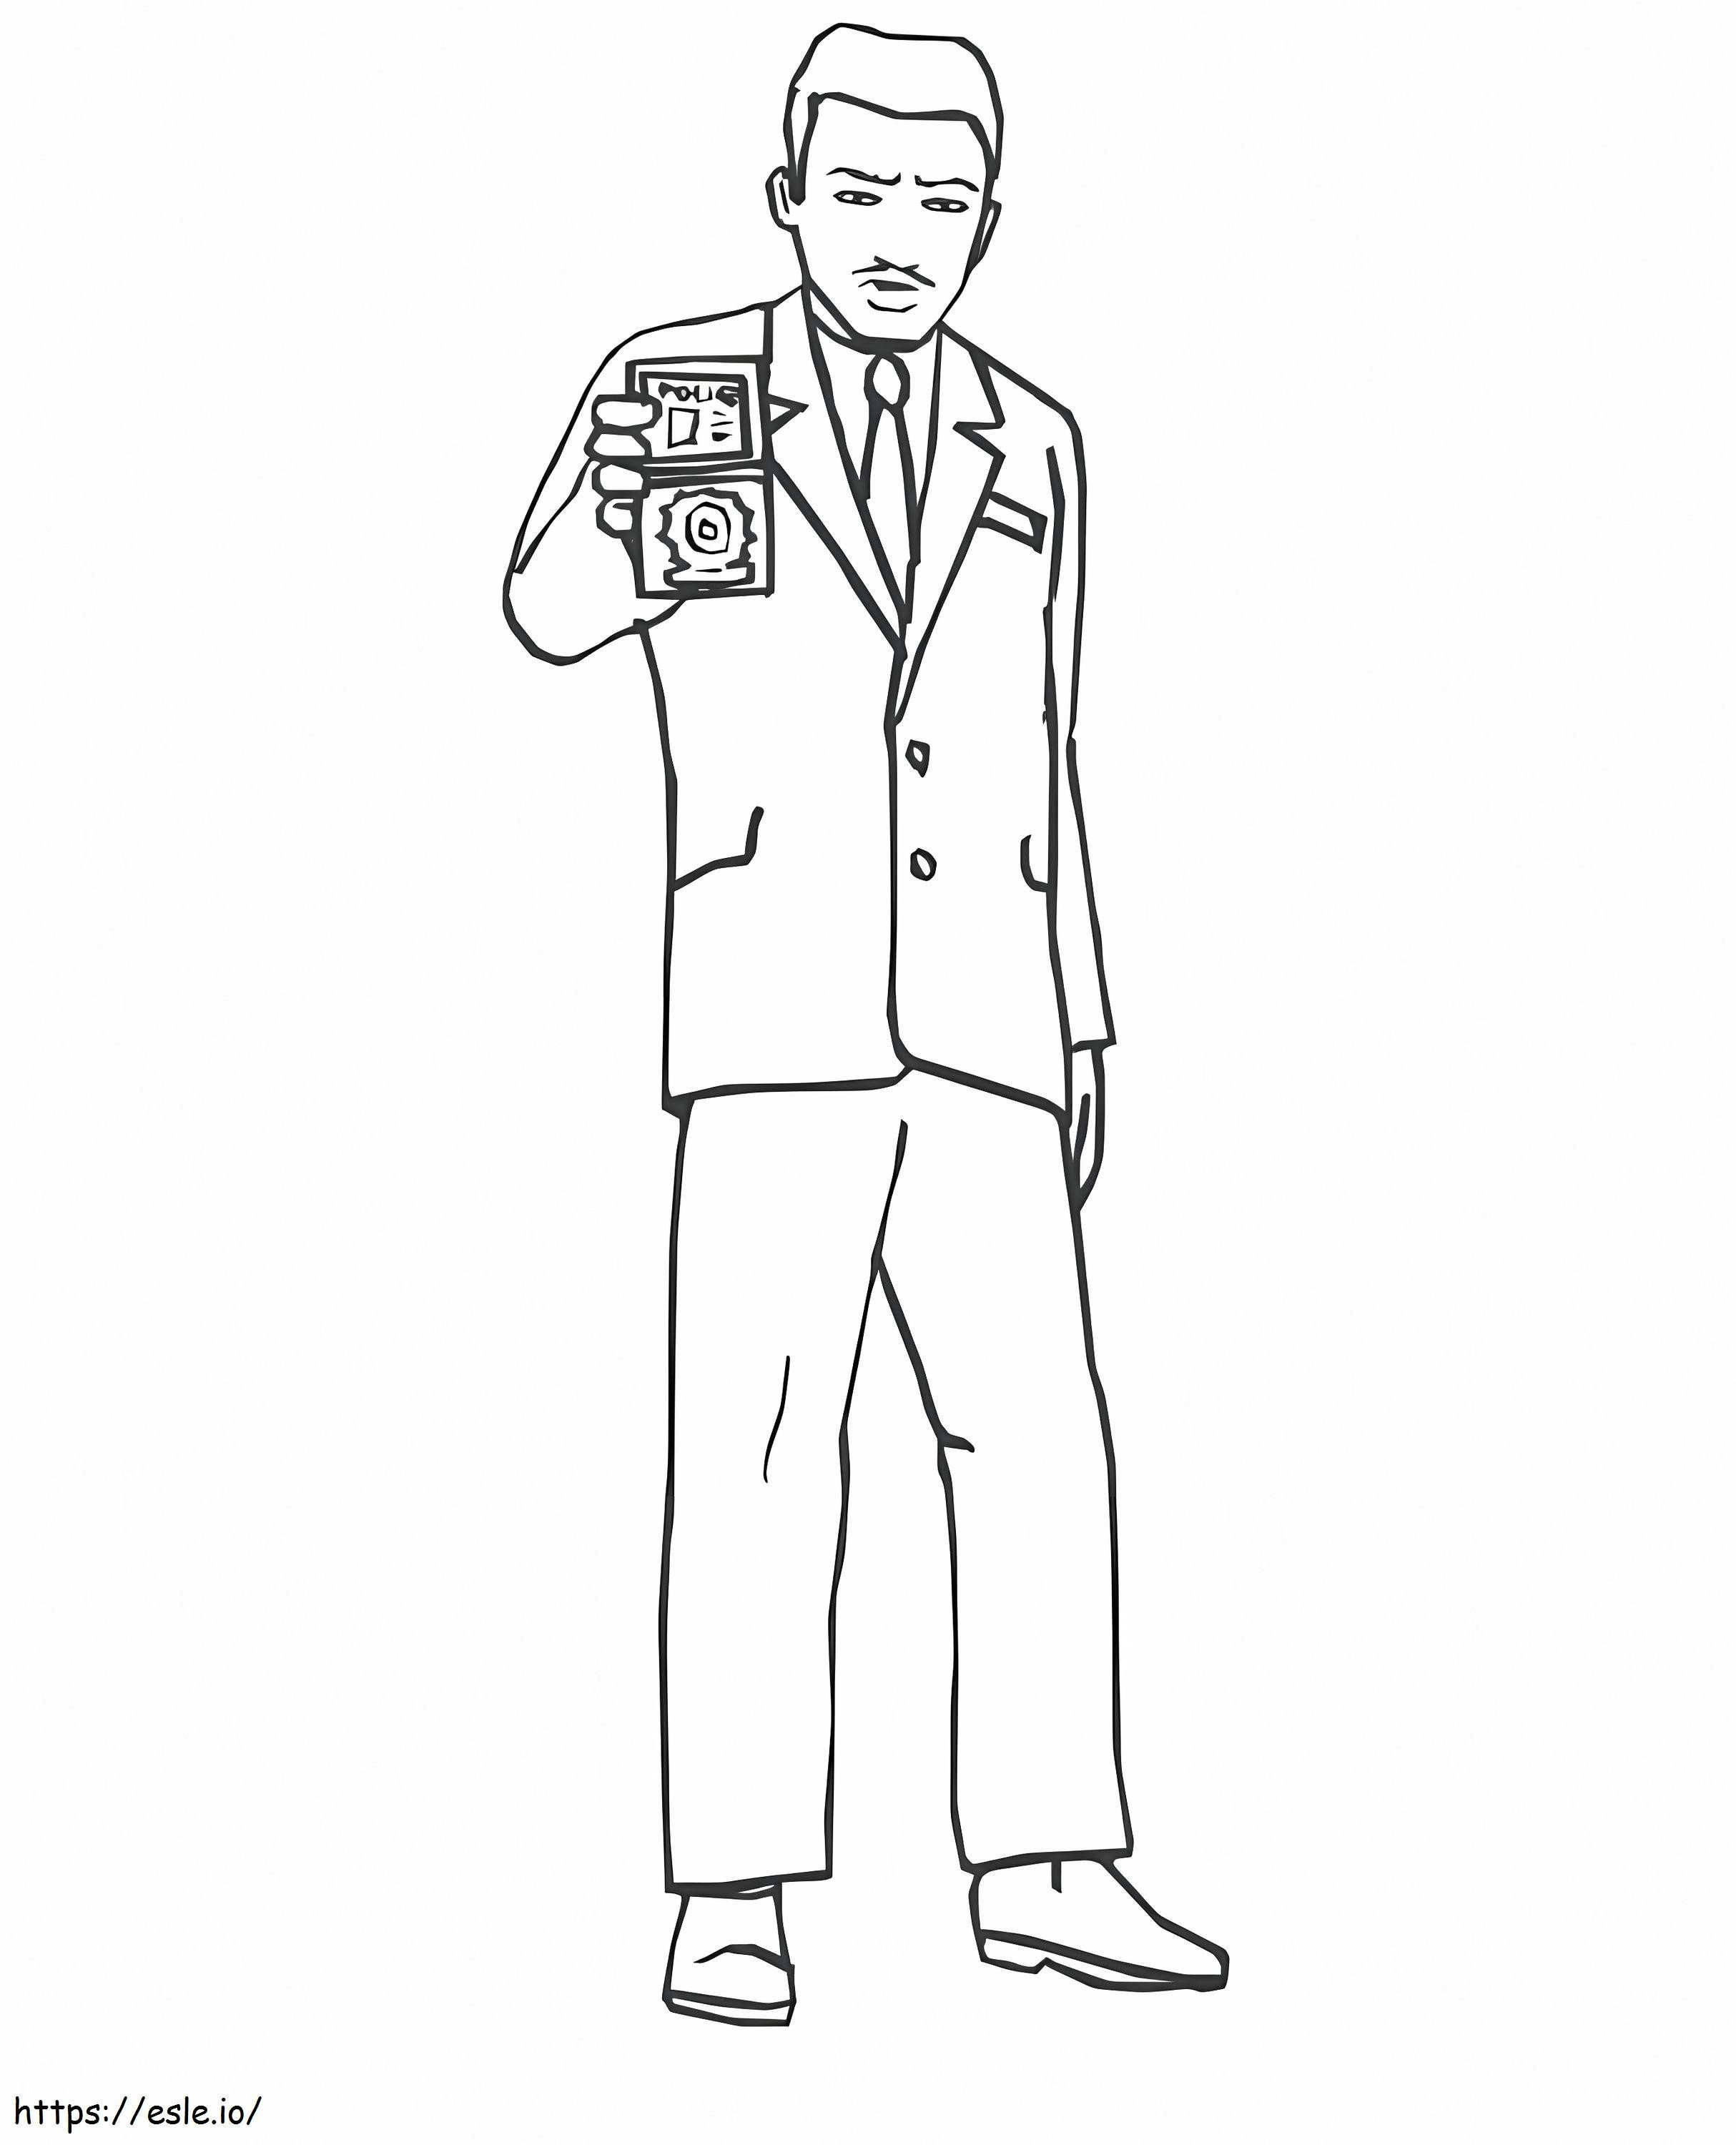 Police Detective 1 coloring page